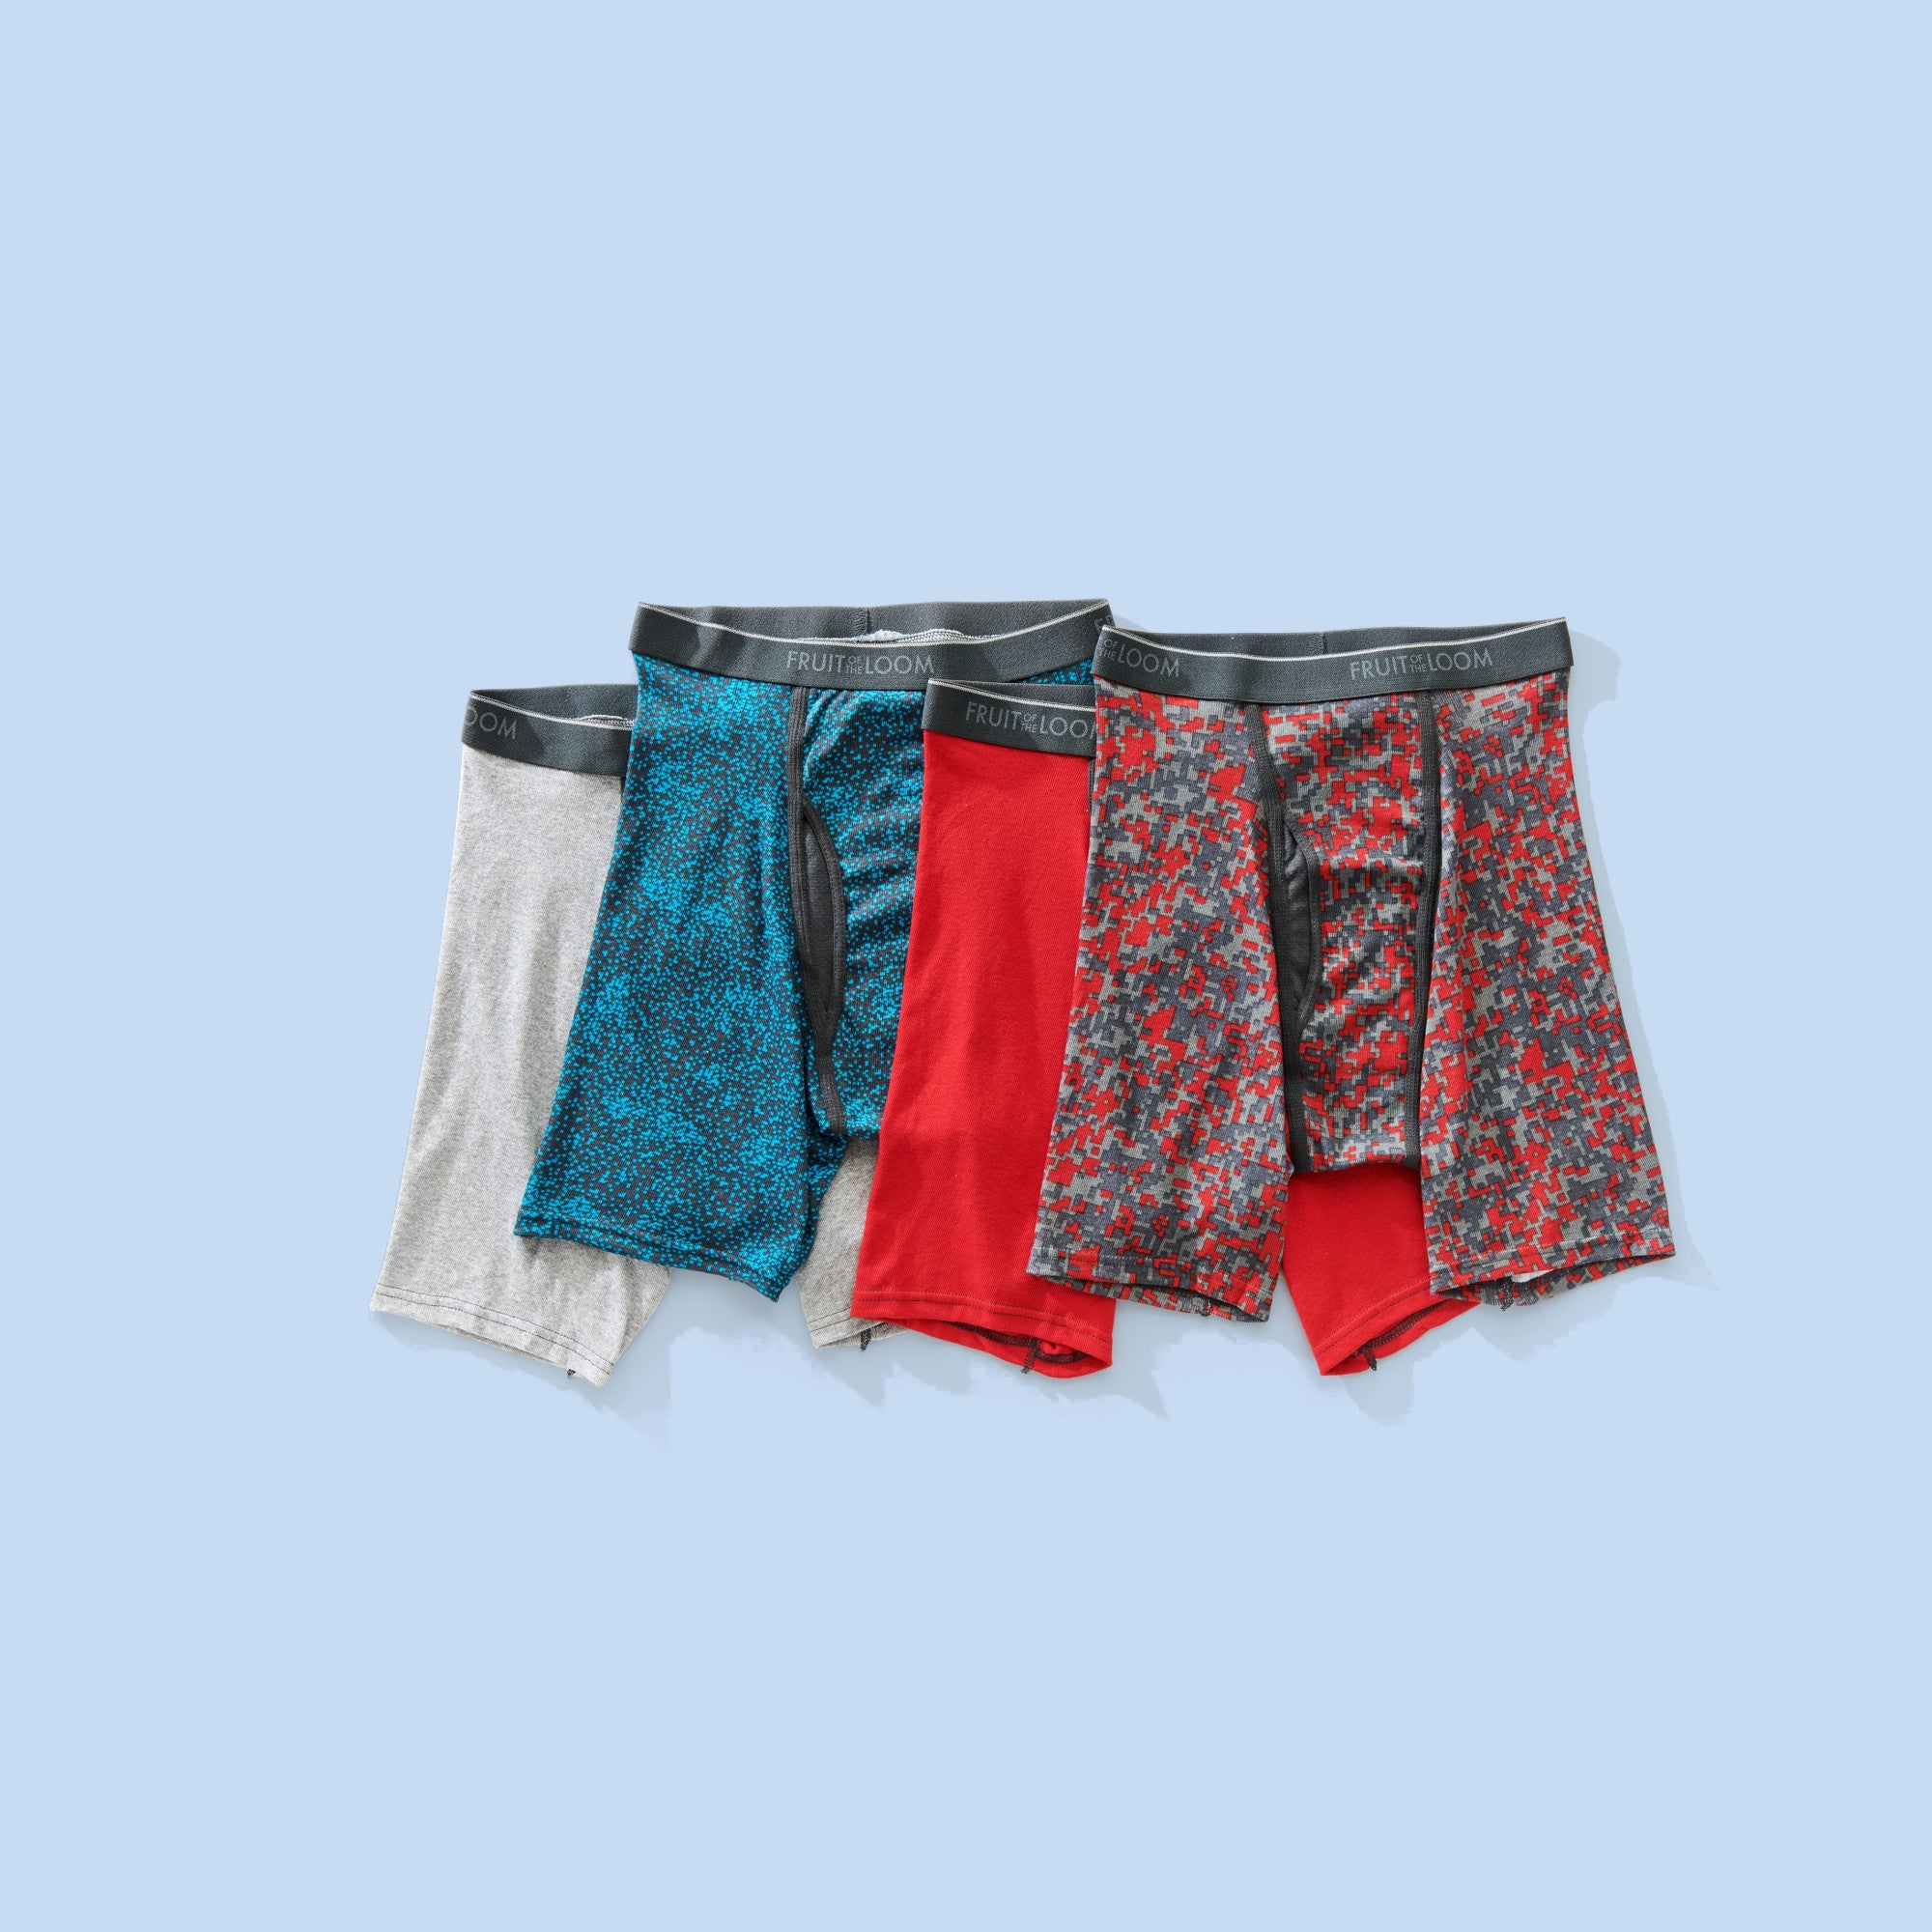 Buy Mens Classic Boxer (2 Pack) from Fruit Of The Loom Underwear